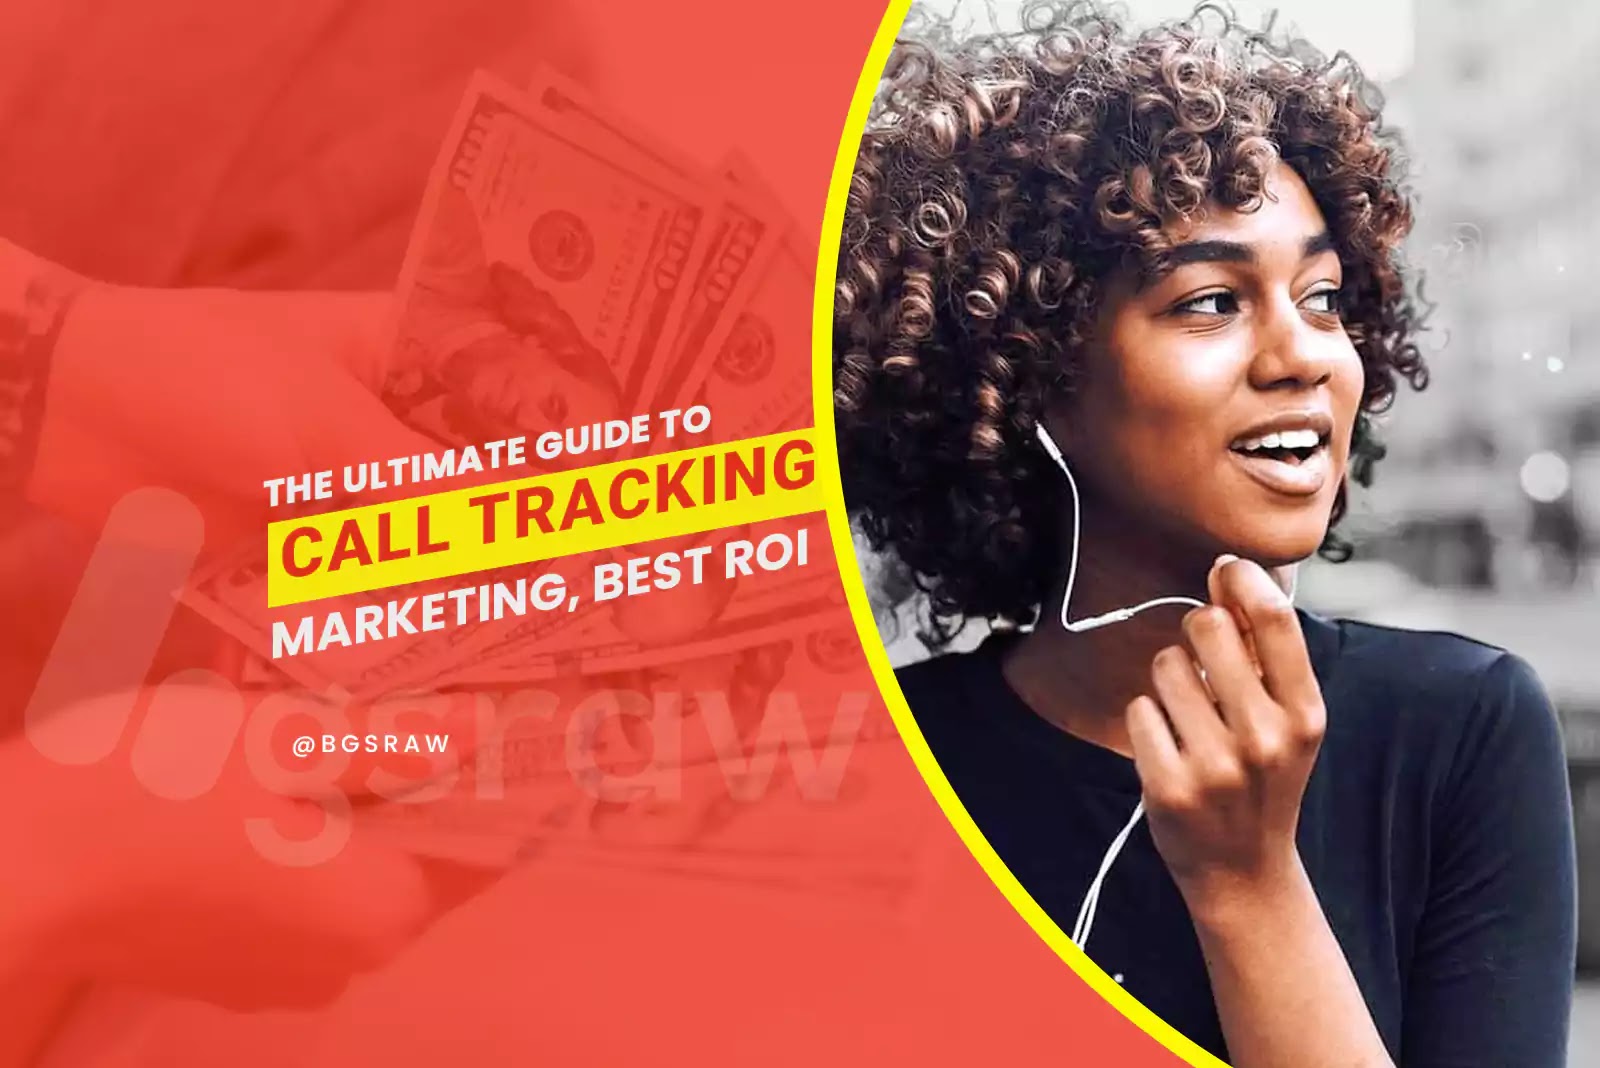 The Ultimate Guide to Call Tracking Marketing